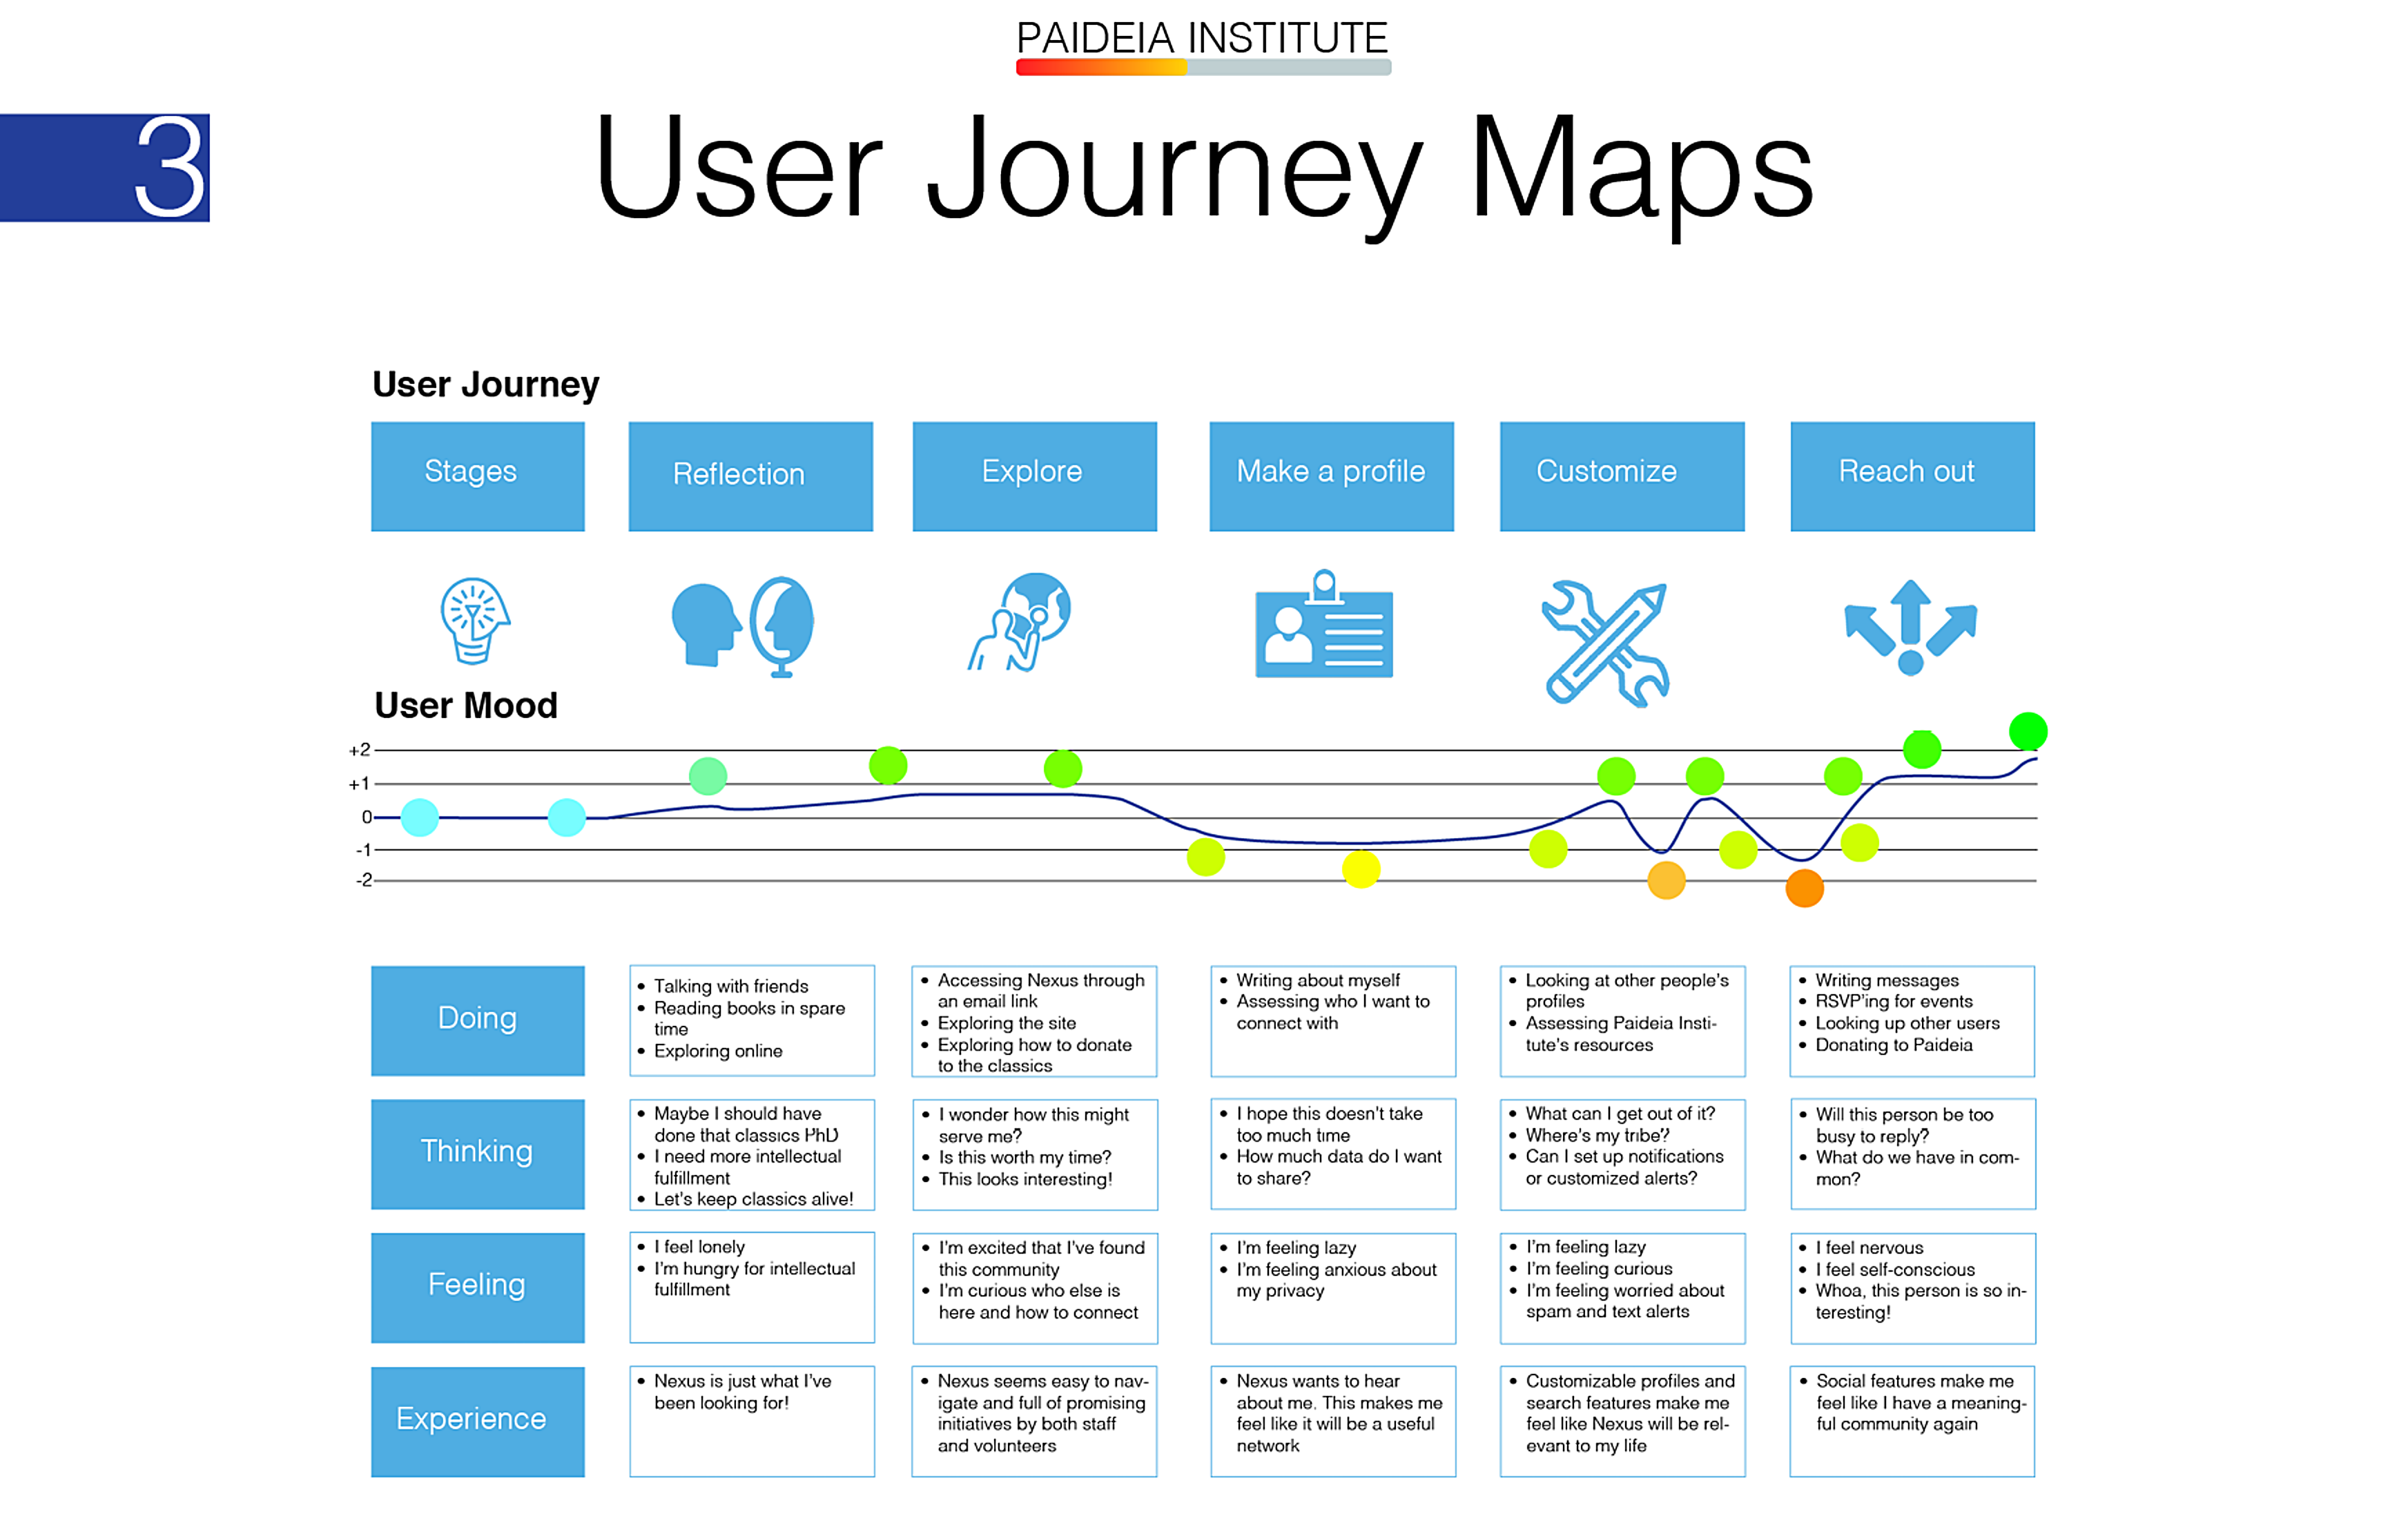 creating user journeys to show the ecosystem of emotions, thoughts, feelings, and actions that our users take before, during, and after interacting with our product to fulfill their needs